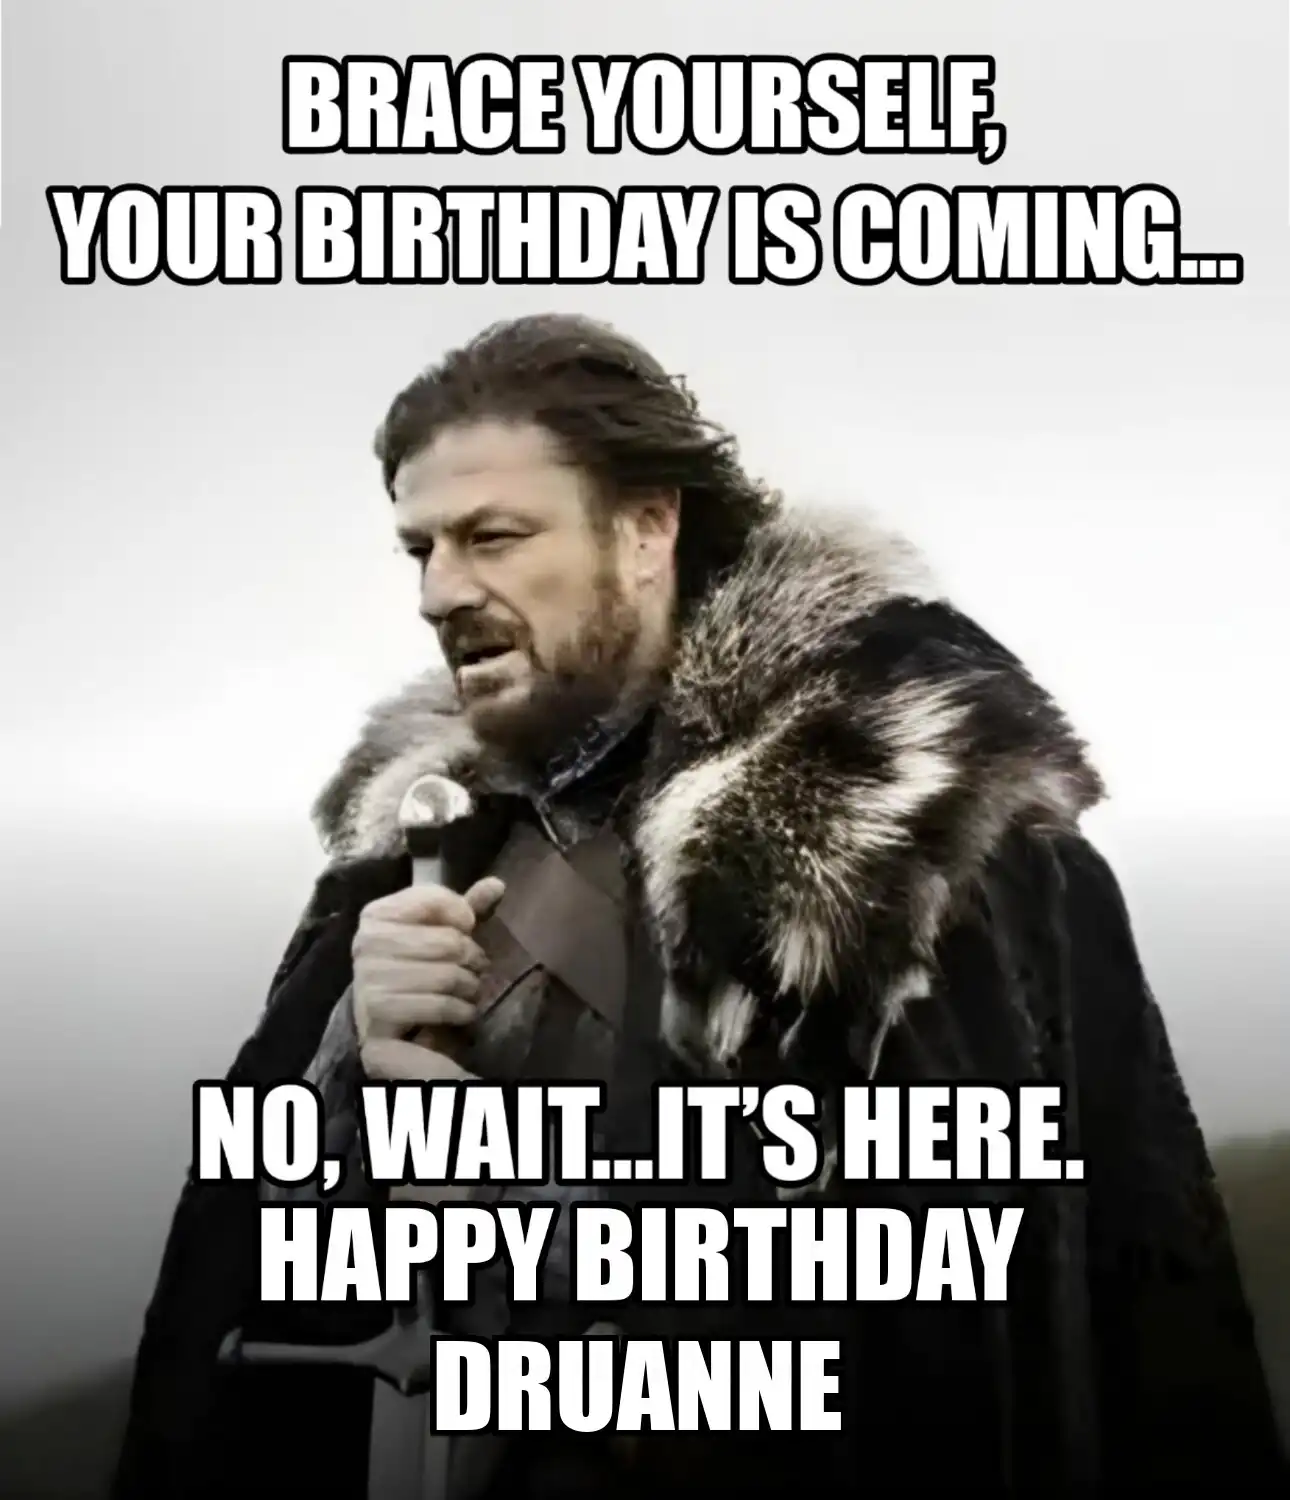 Happy Birthday Druanne Brace Yourself Your Birthday Is Coming Meme